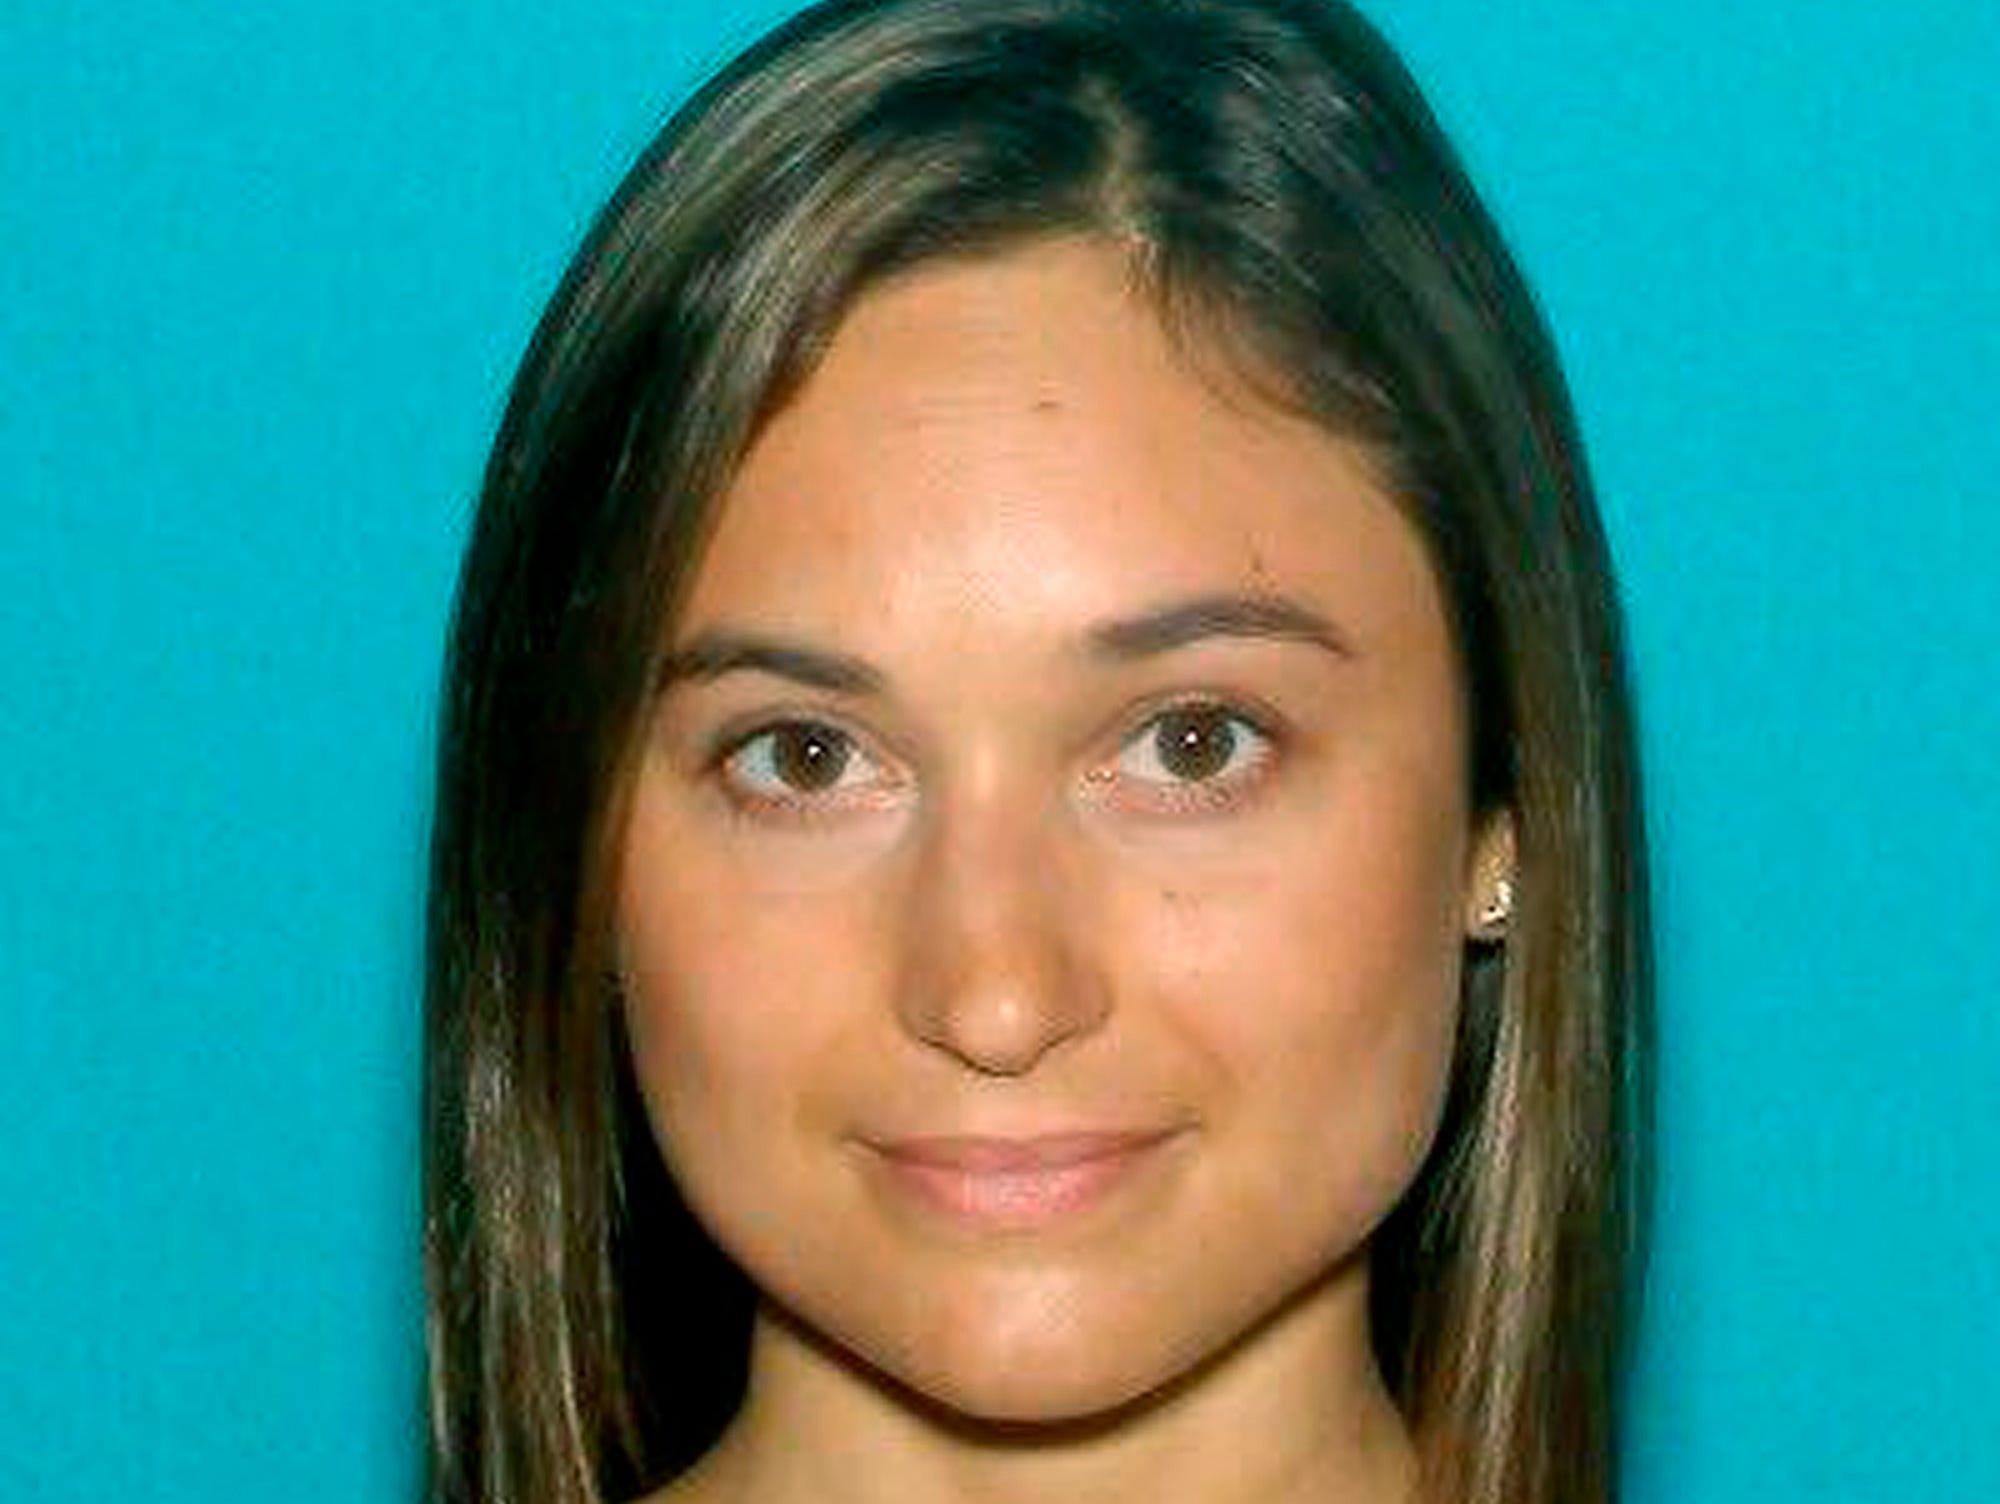 Driver's license photo released by the Worcester County District Attorney's Office shows Vanessa Marcotte, of New York, whose body was found Aug. 7, 2016.